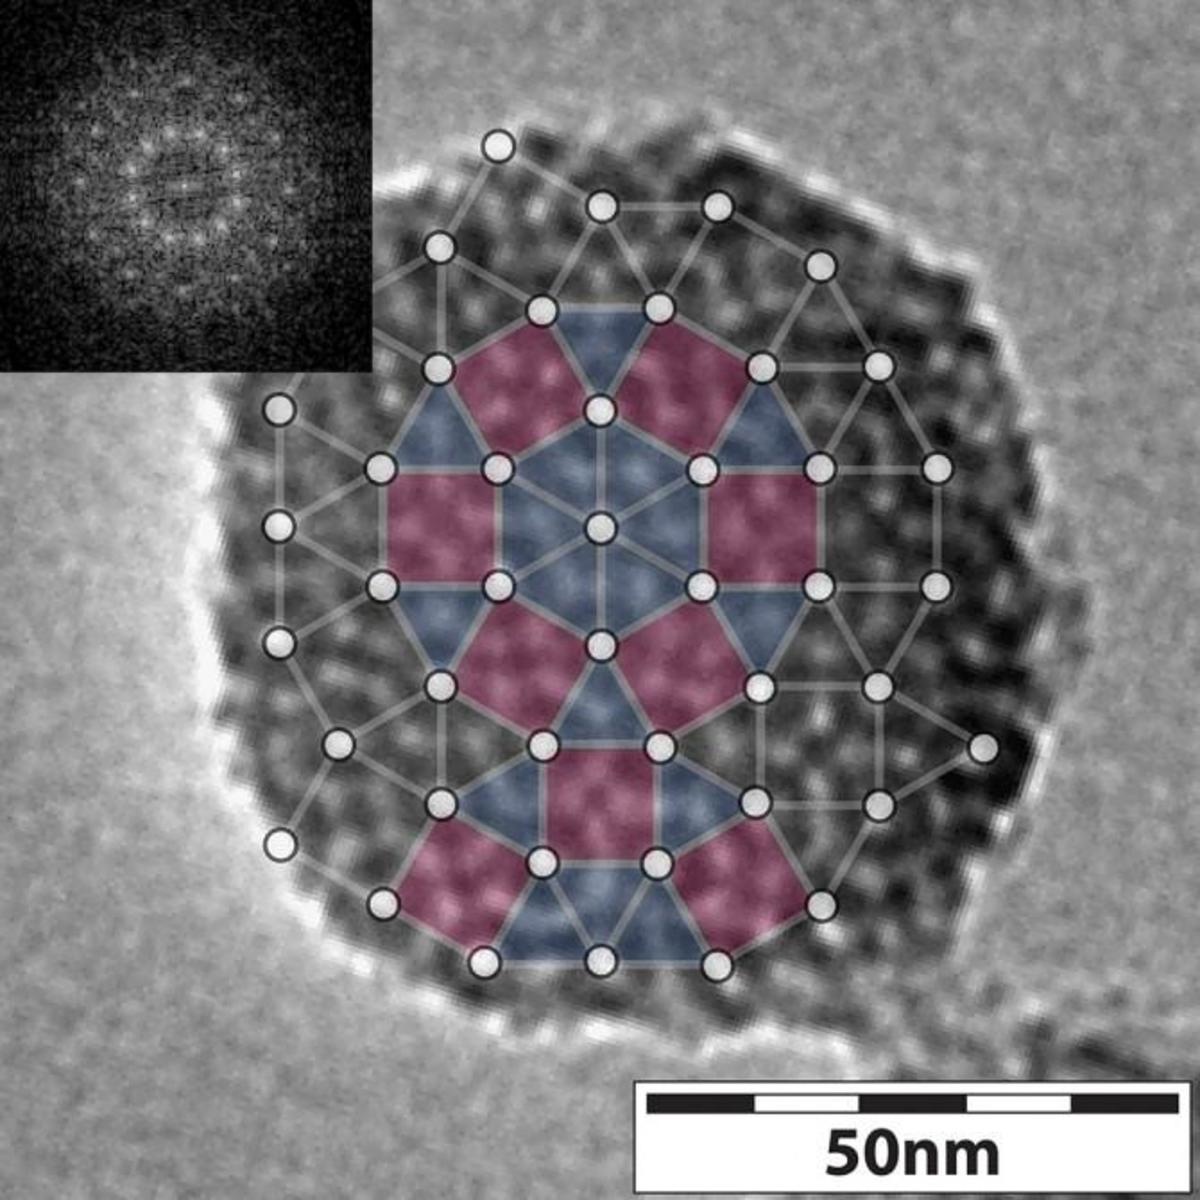 A transmission electron microscope image of the nanoparticle and the tiling pattern of it.